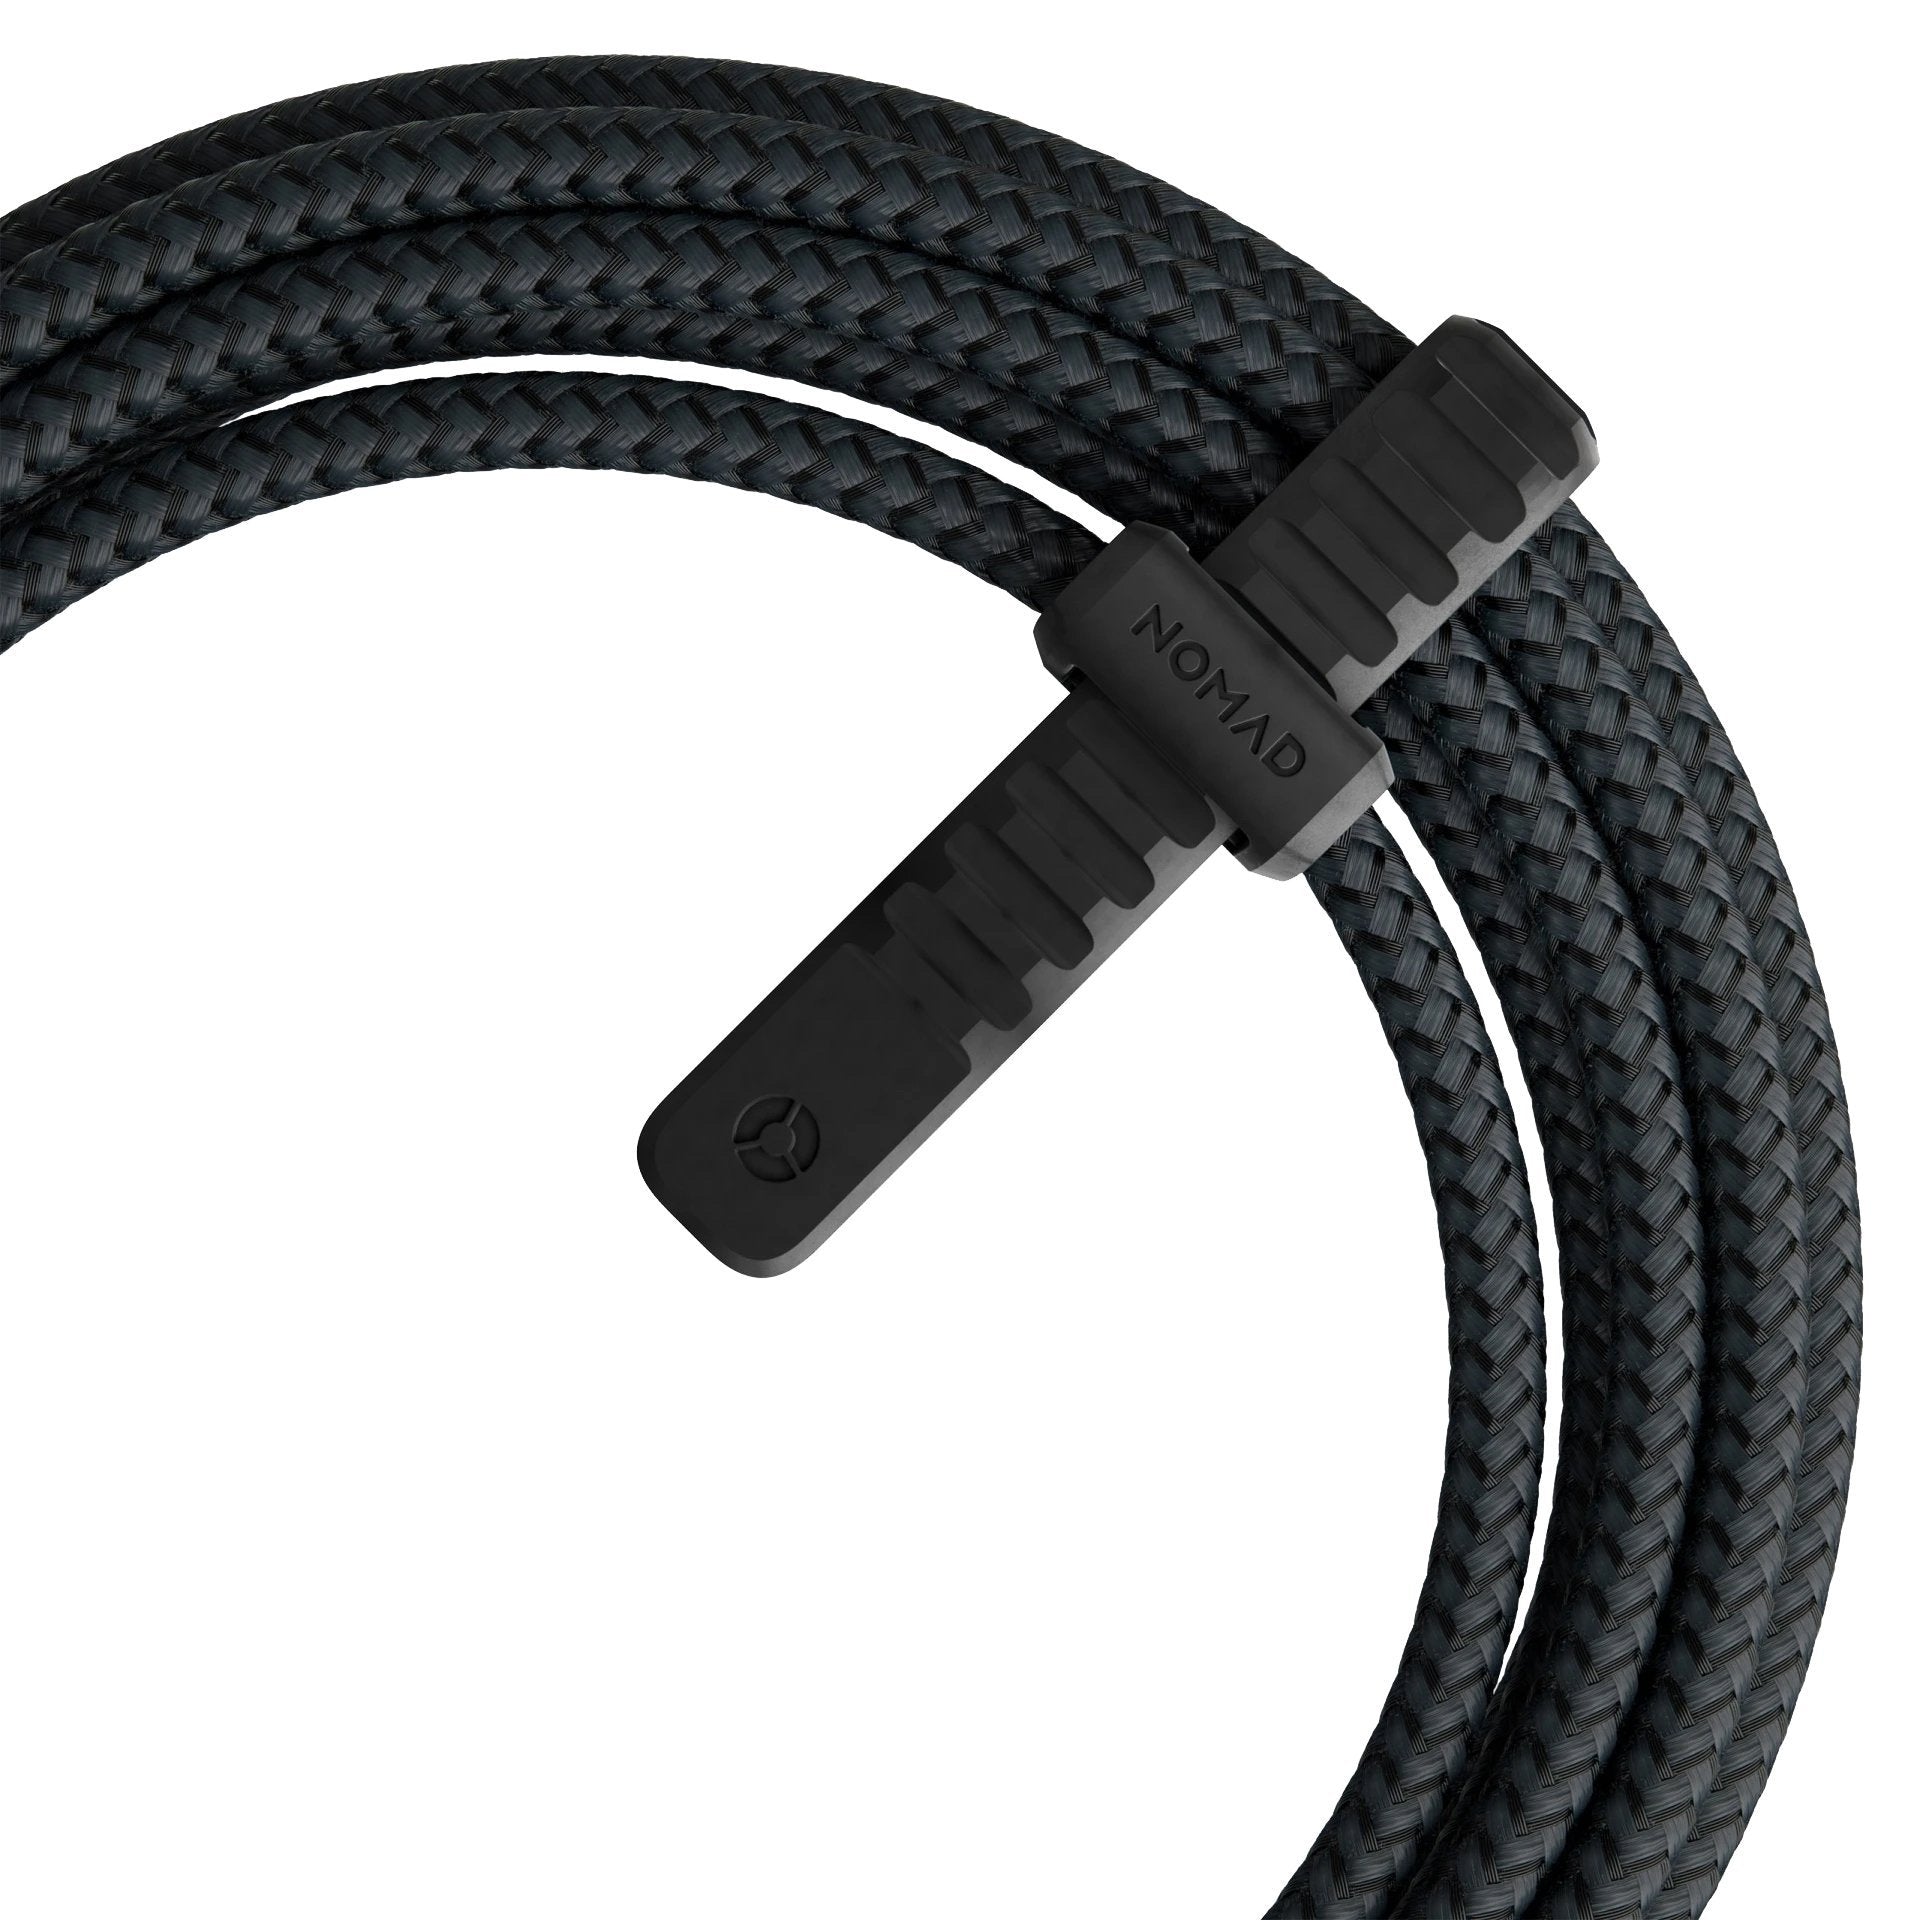 NOMAD Rugged 3-in-1 Cables 1.5M, Black Cable NOMAD 